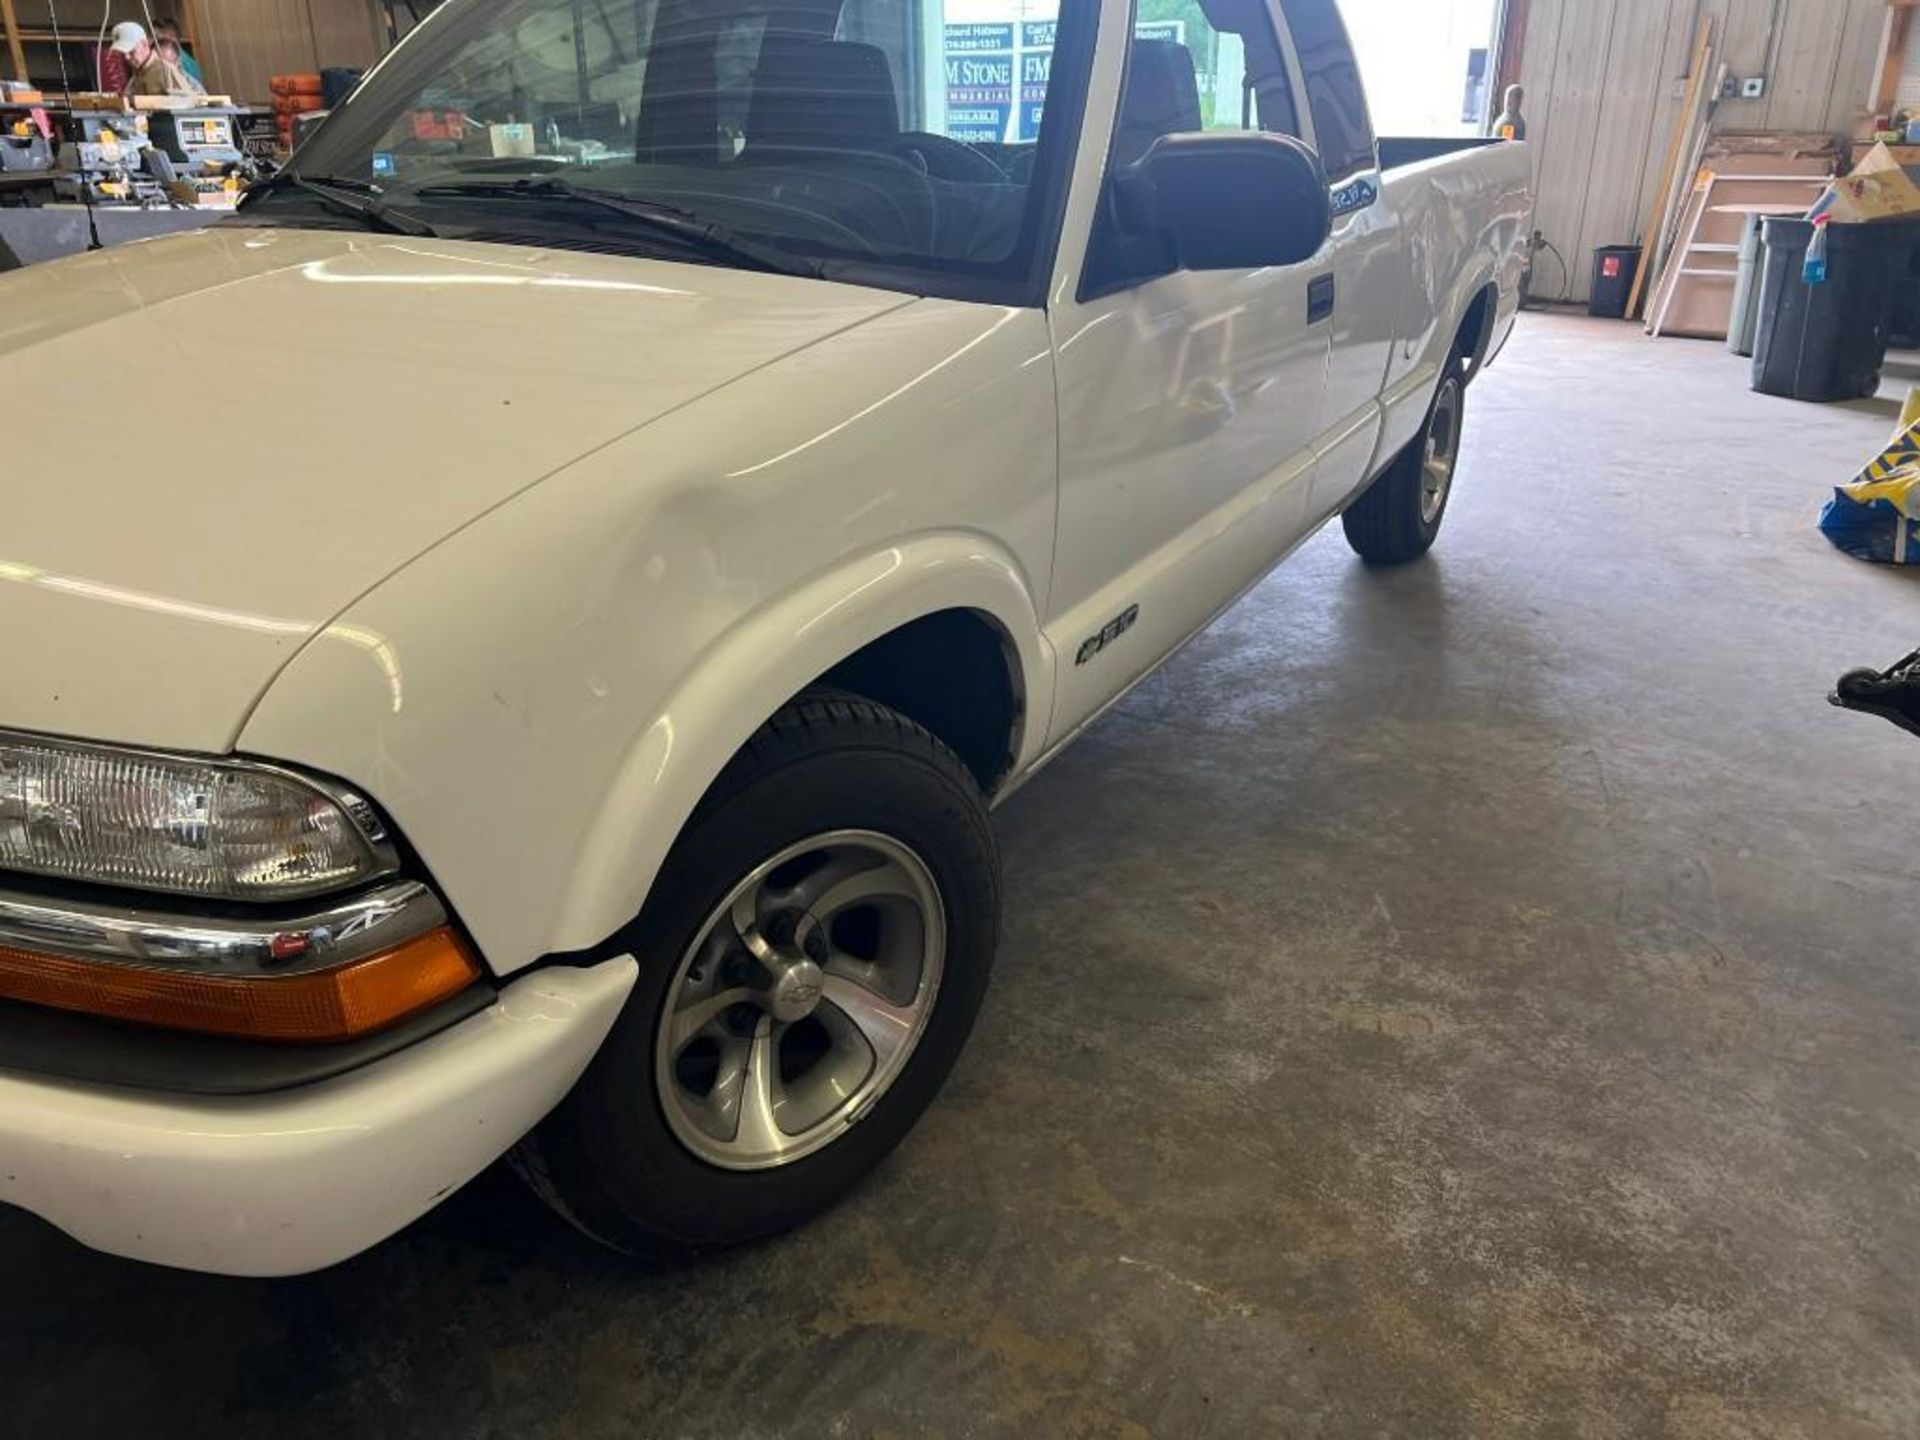 2002 Chevrolet S10 pick up truck. Extended cab. 4cyl. - Image 2 of 10